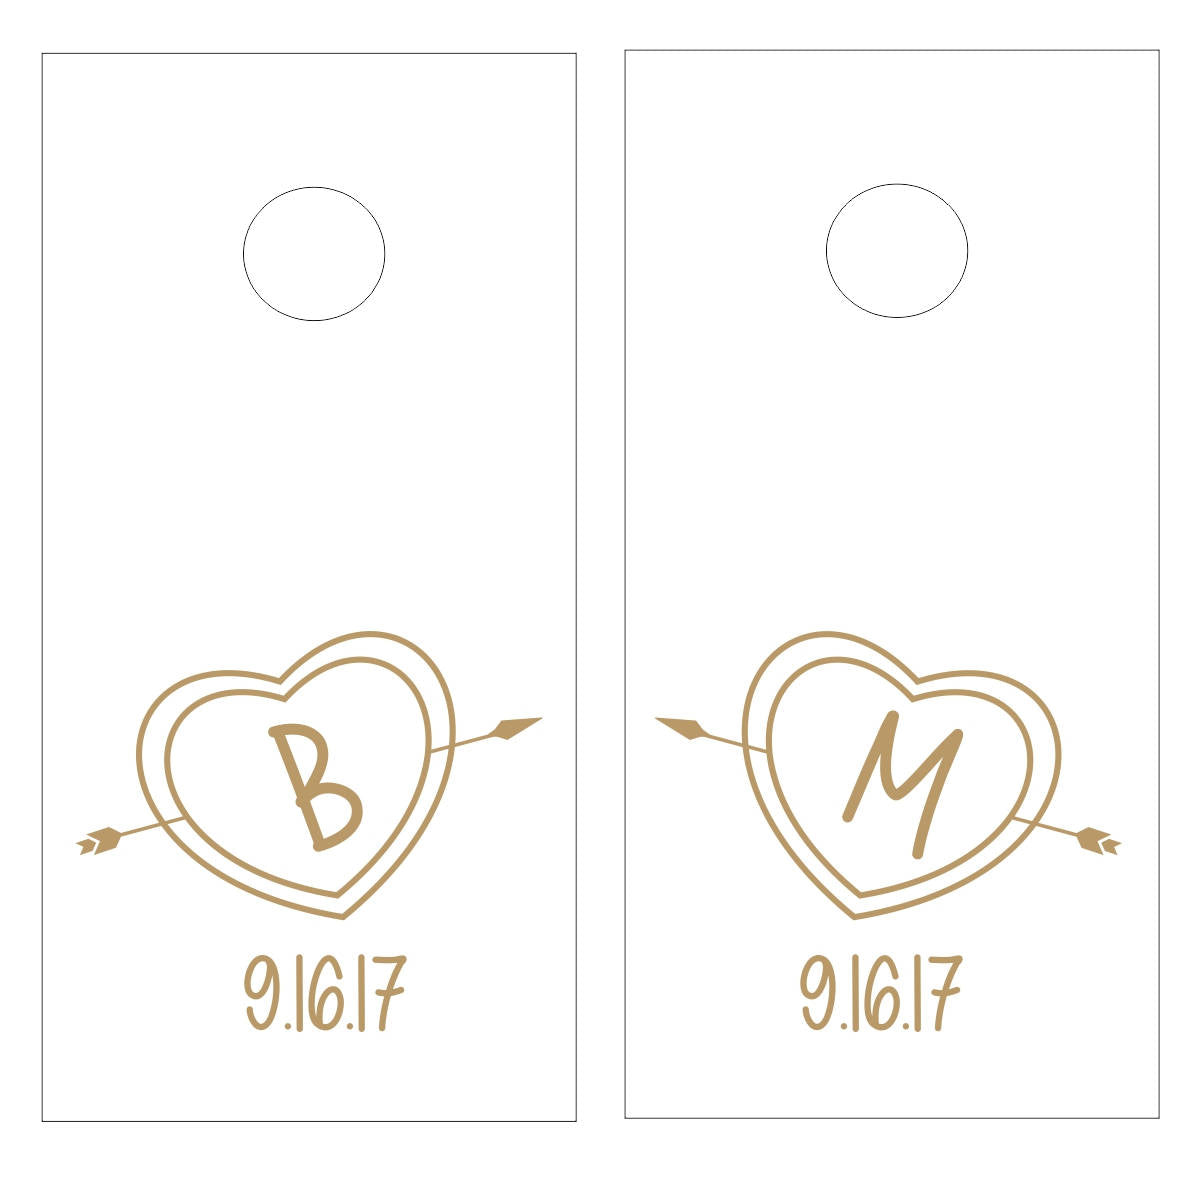 Carved Heart Bride & Groom Initials with Wedding Date Vinyl Decal Set for Cornhole Game Boards